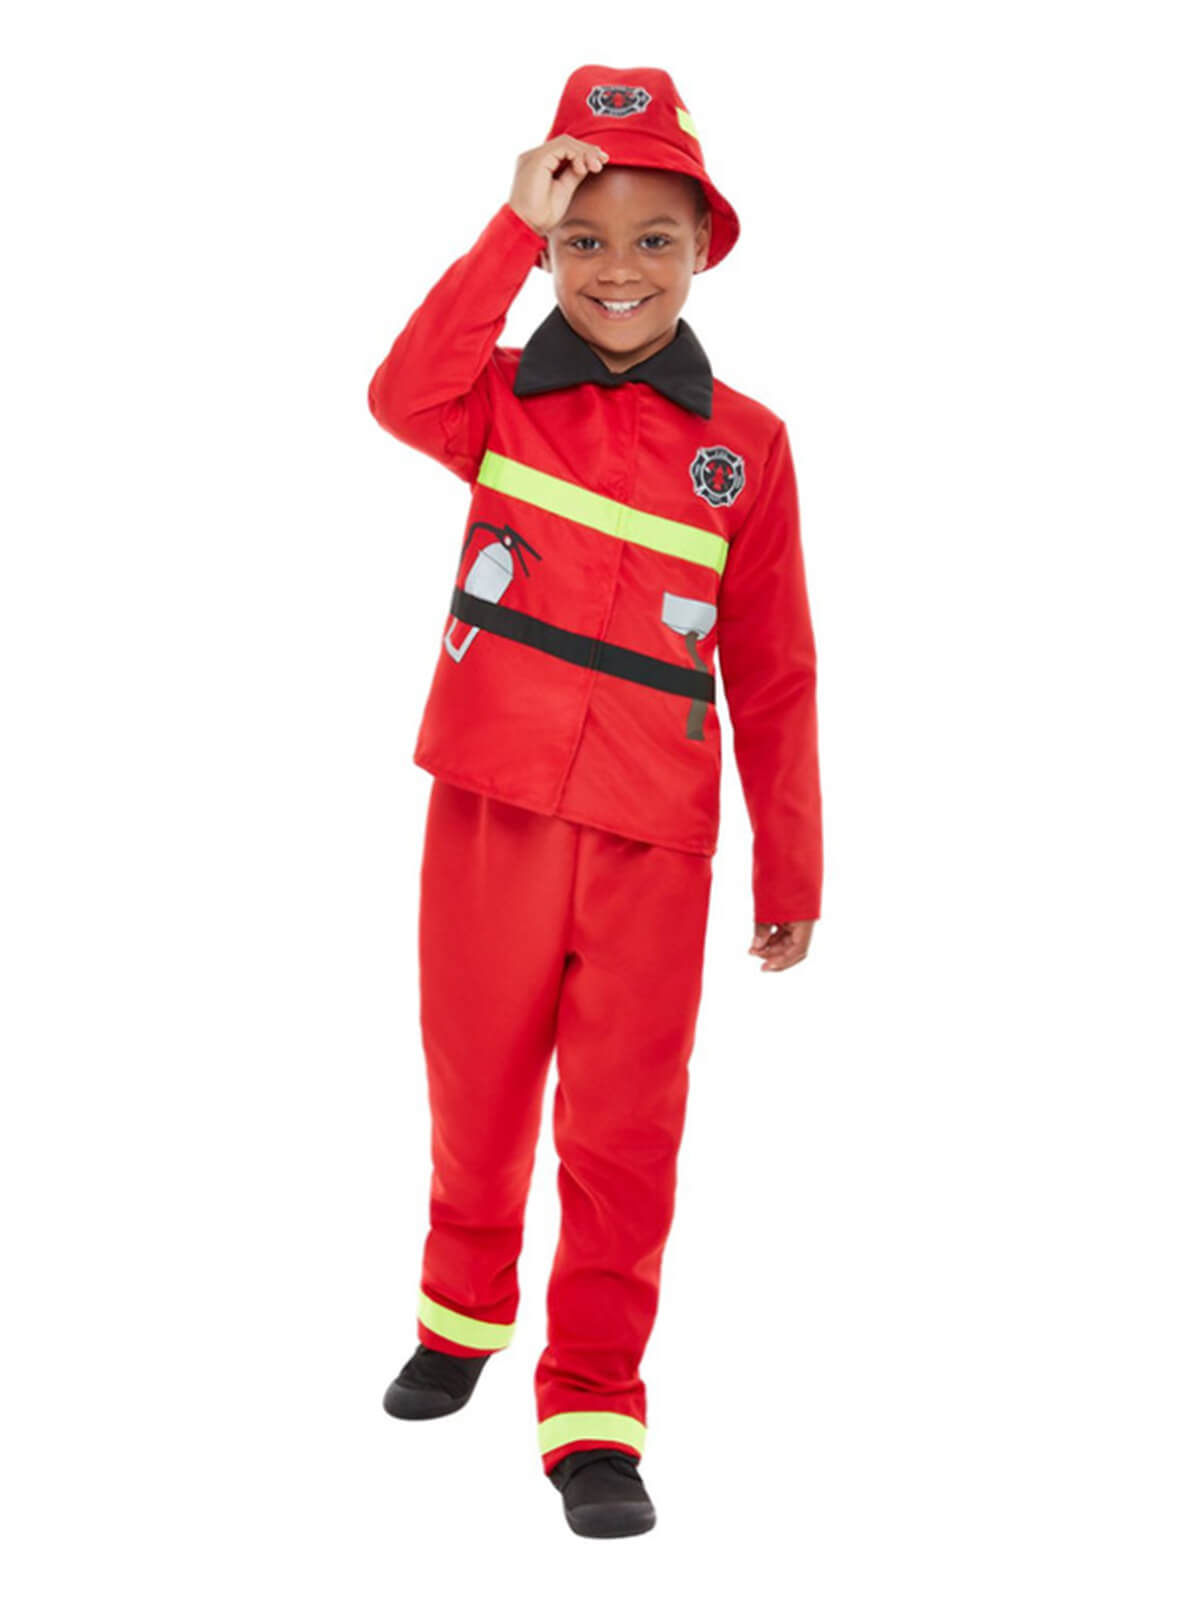 Fire Fighter Costume